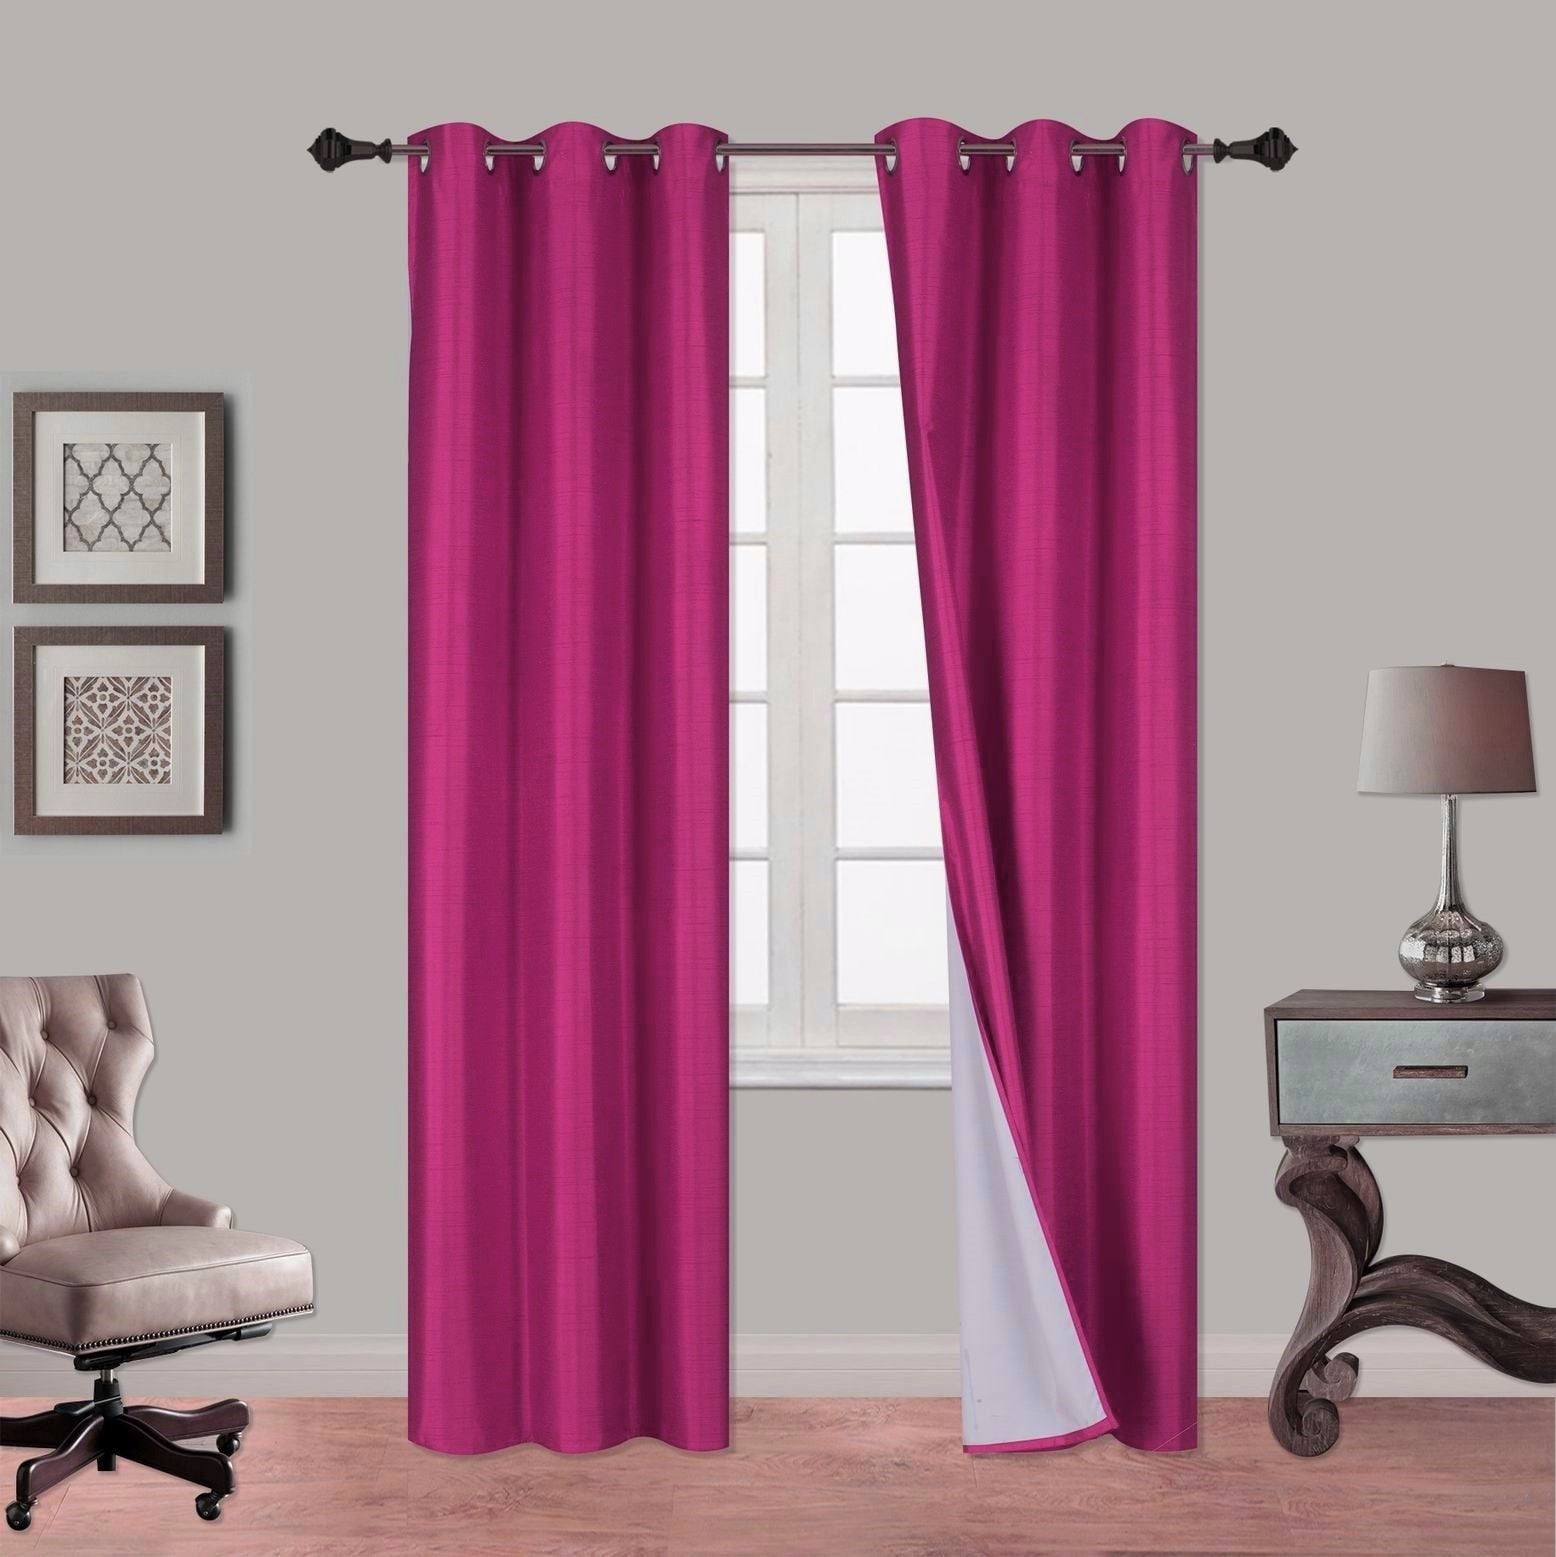 1 Set Eclipse 100% Blackout Window Curtain Panel Lined Insulated Thermal NOA 